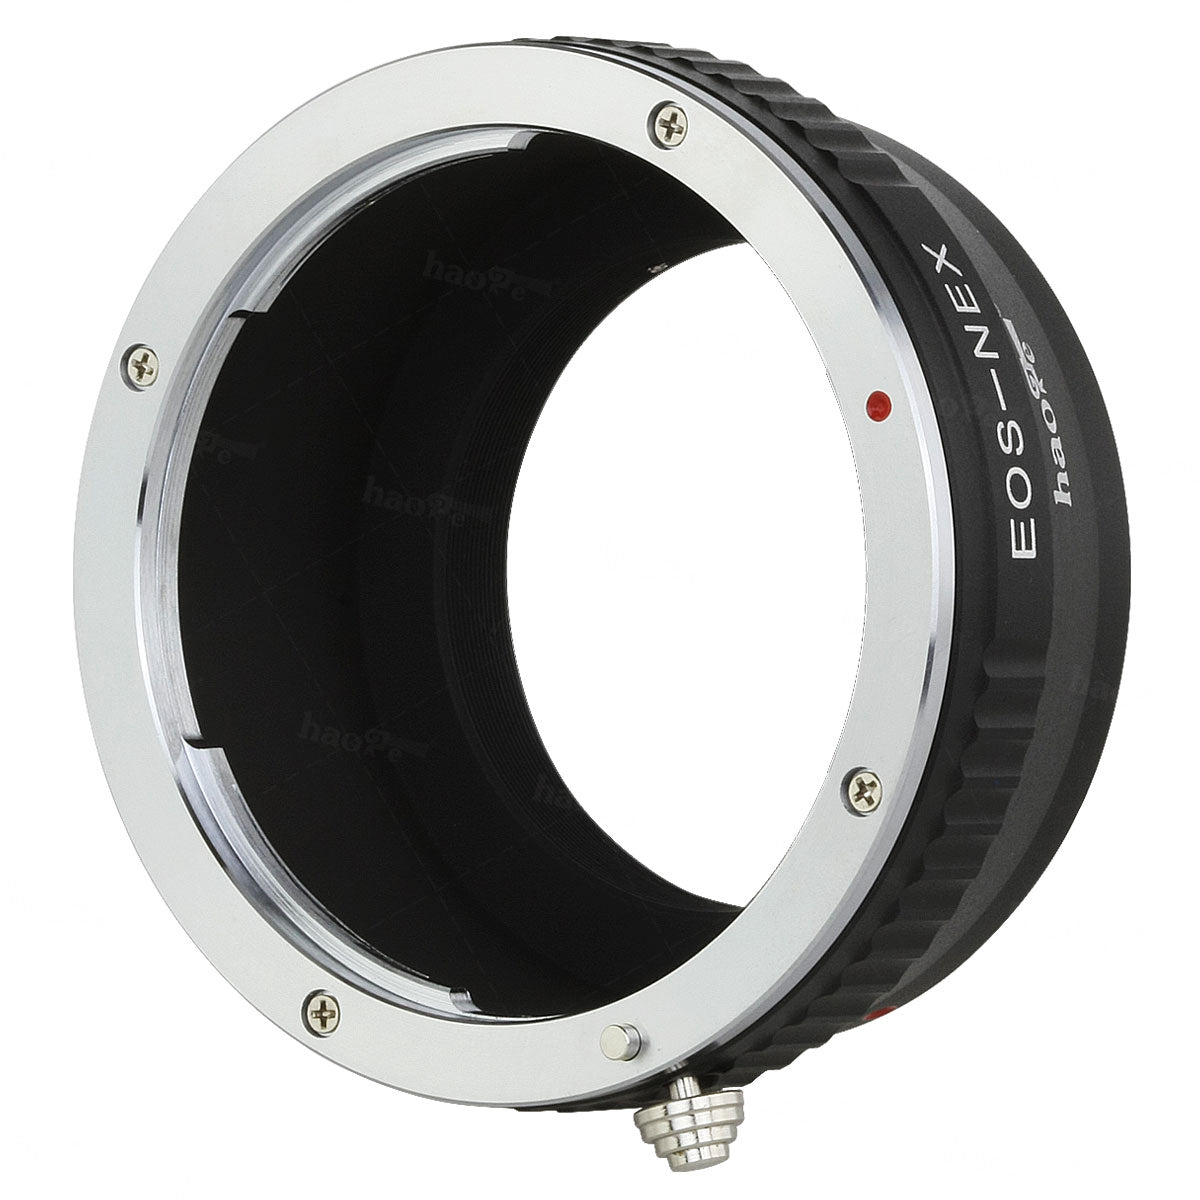 Haoge Lens Mount Adapter for Canon EOS EF EF-S Mount Lens to Sony E-mount NEX Camera such as NEX-3, NEX-5, NEX-5N, NEX-7, NEX-7N, NEX-C3, NEX-F3, a6300, a6000, a5000, a3500, a3000, NEX-VG10, VG20